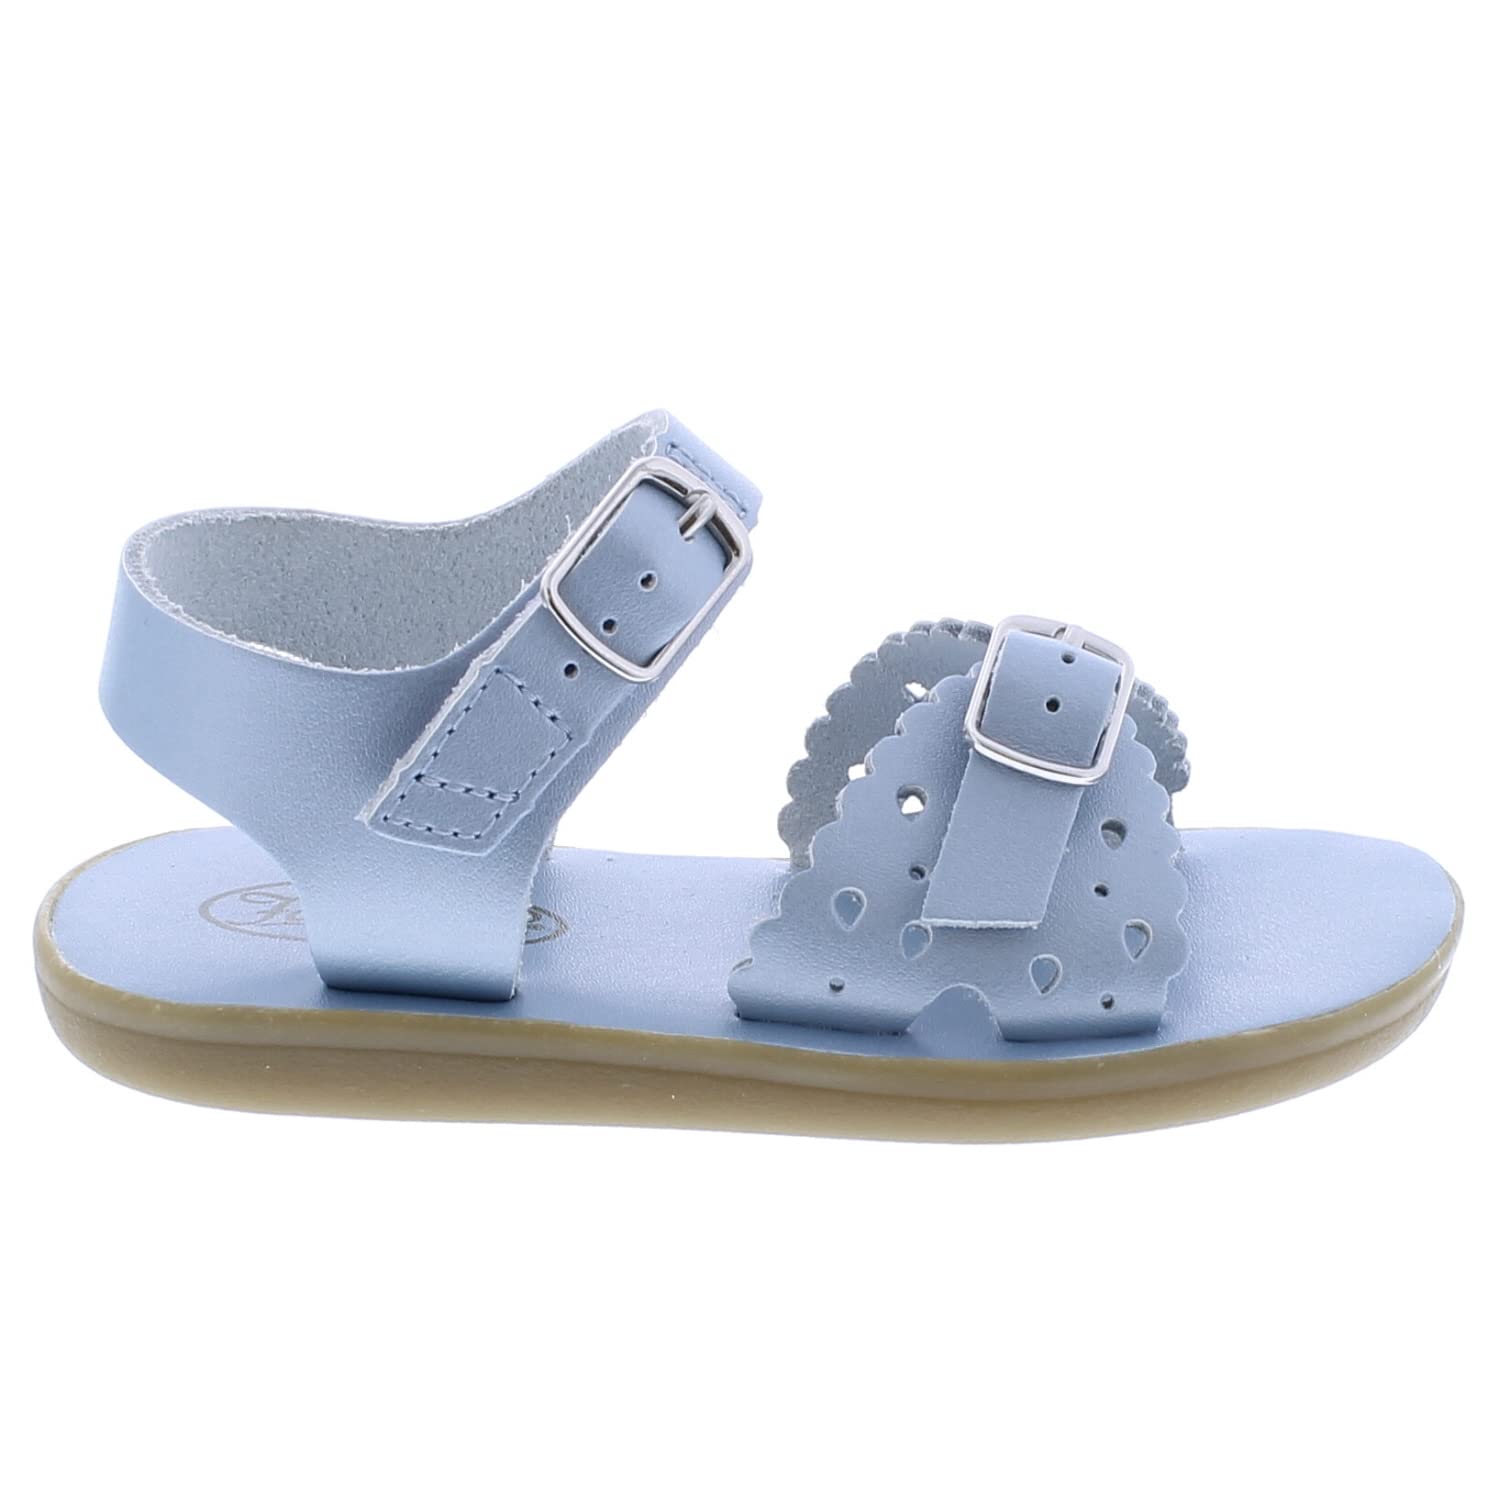 FOOTMATES Ariel and Eco-Ariel Waterproof Sandals for Girls and Boys - Microfiber Vegan Nappa with Slip-Resistant Non-Marking Outsoles and Strap-Closure, Blue Pearl Micro - 12 Little Kid (4-8 Years)